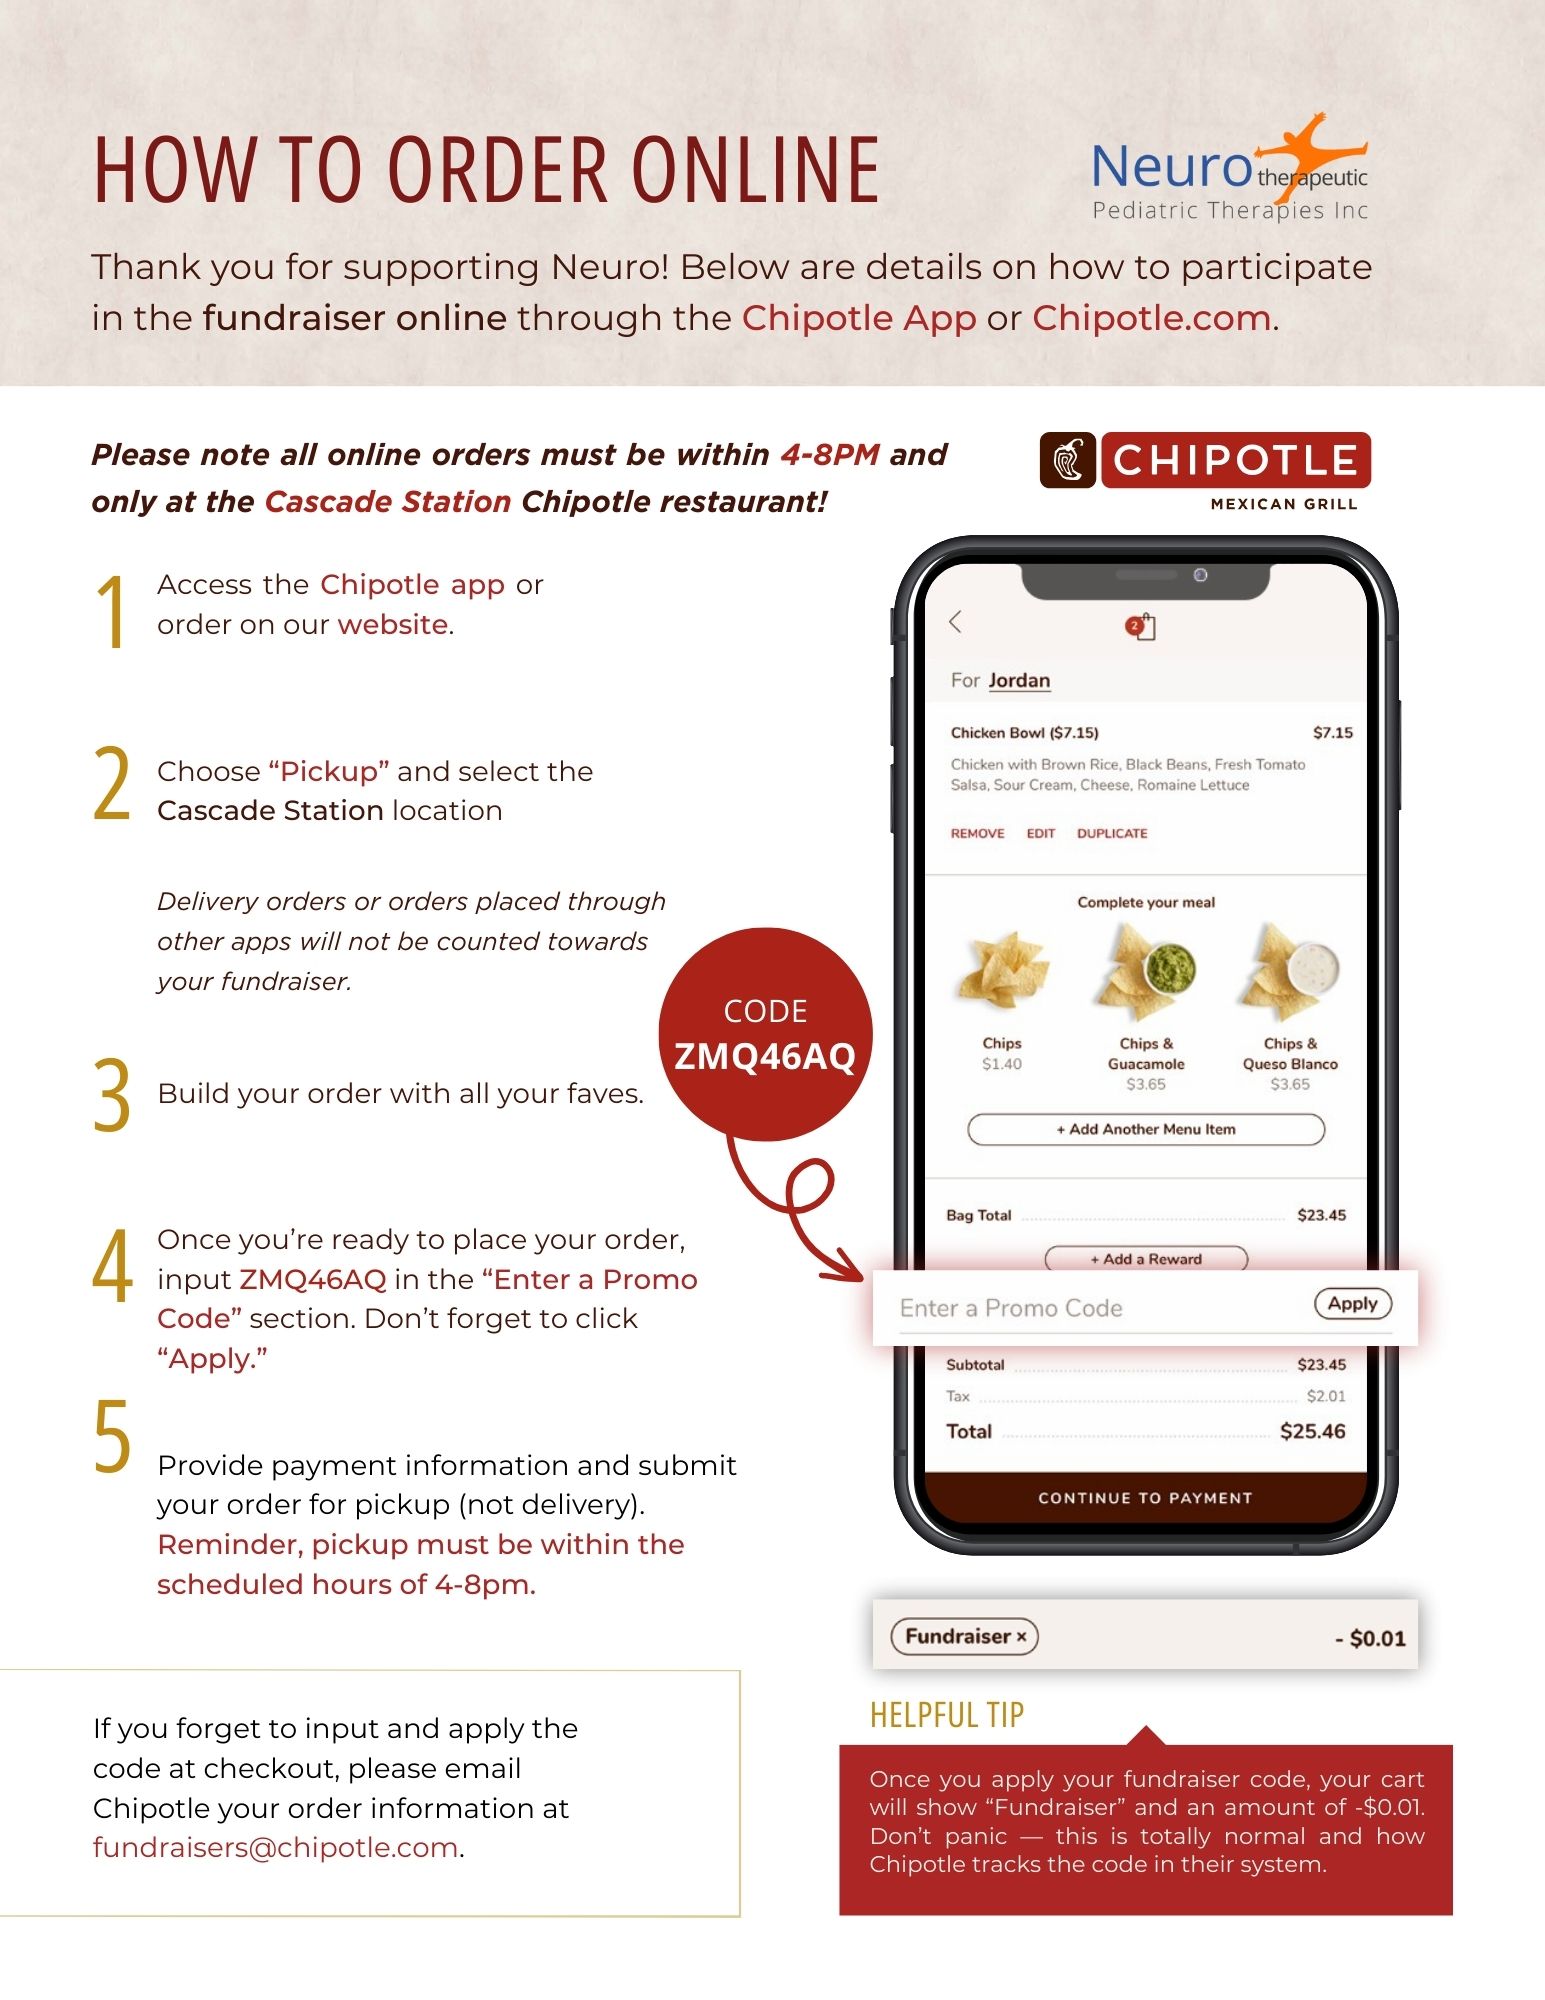 Instructions on how to order Chipotle online to contribute to the fundraiser.